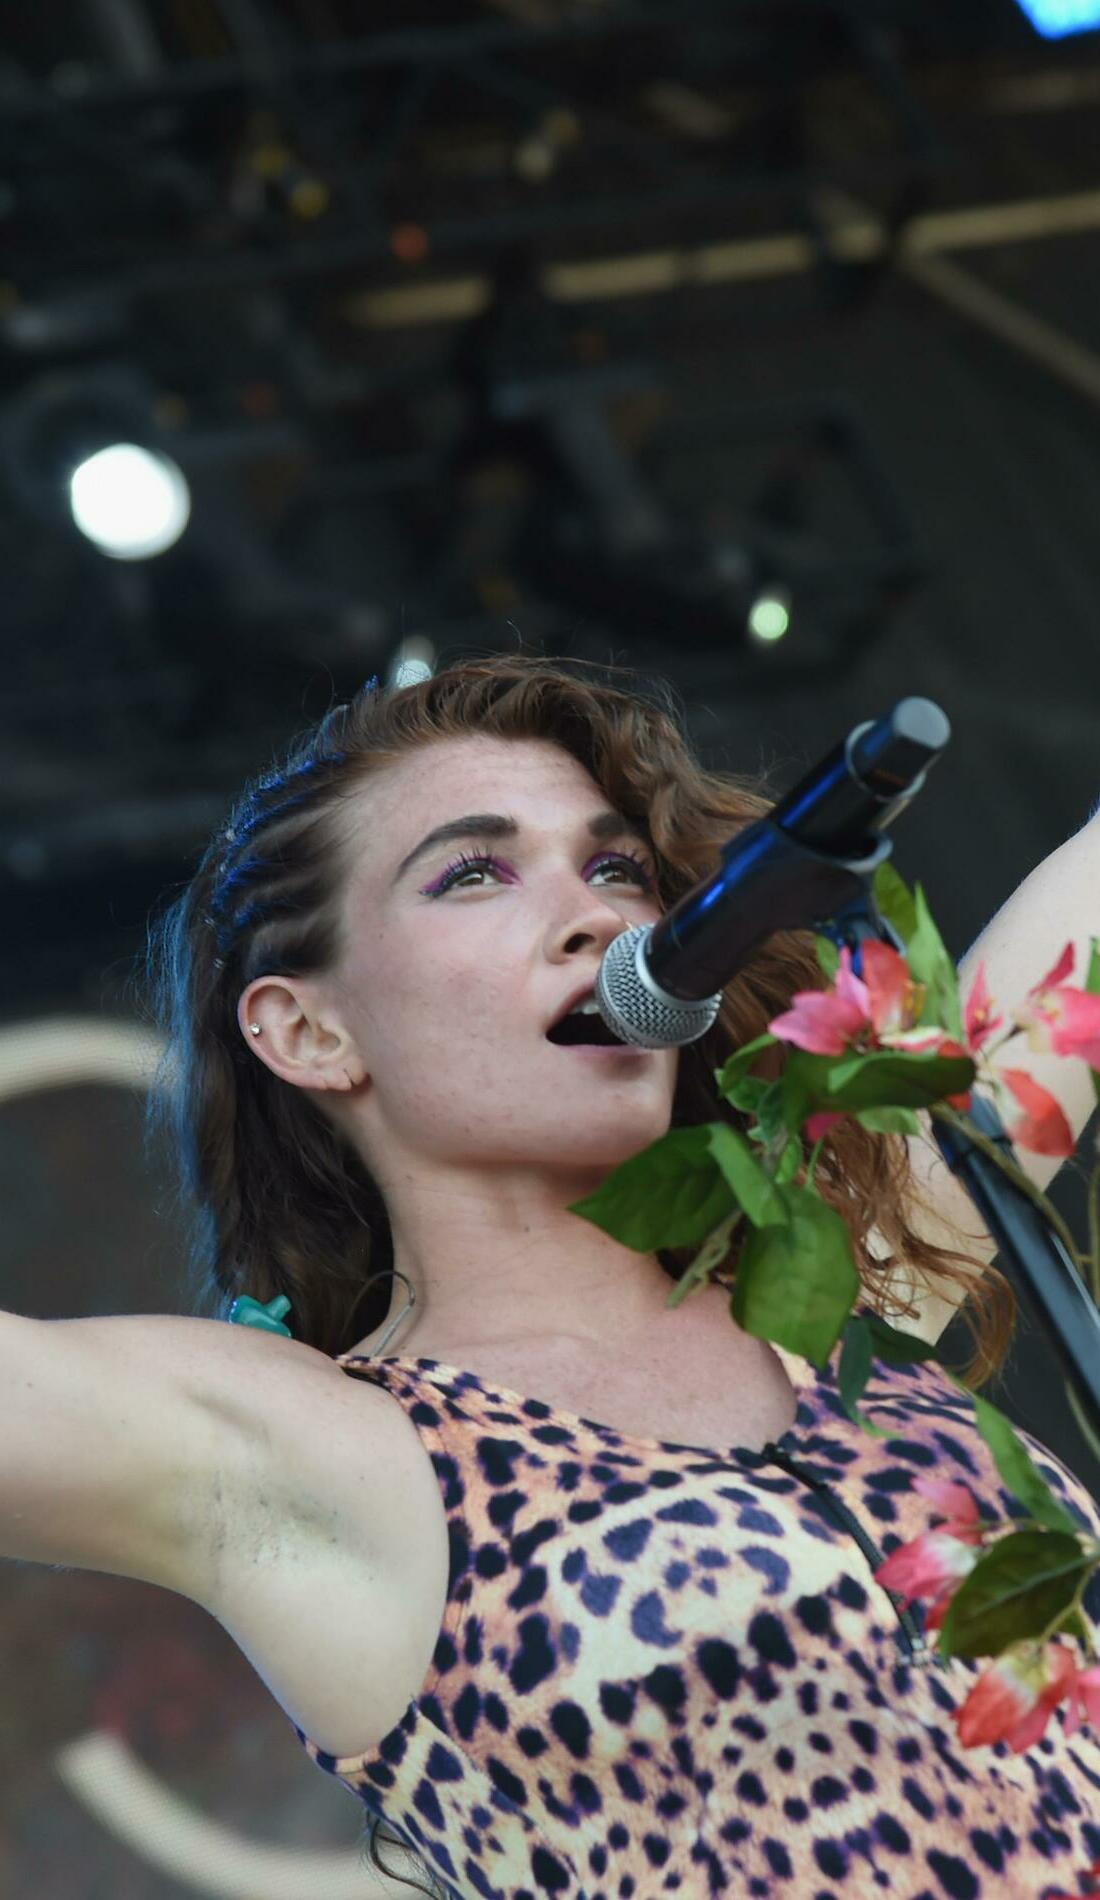 A MisterWives live event